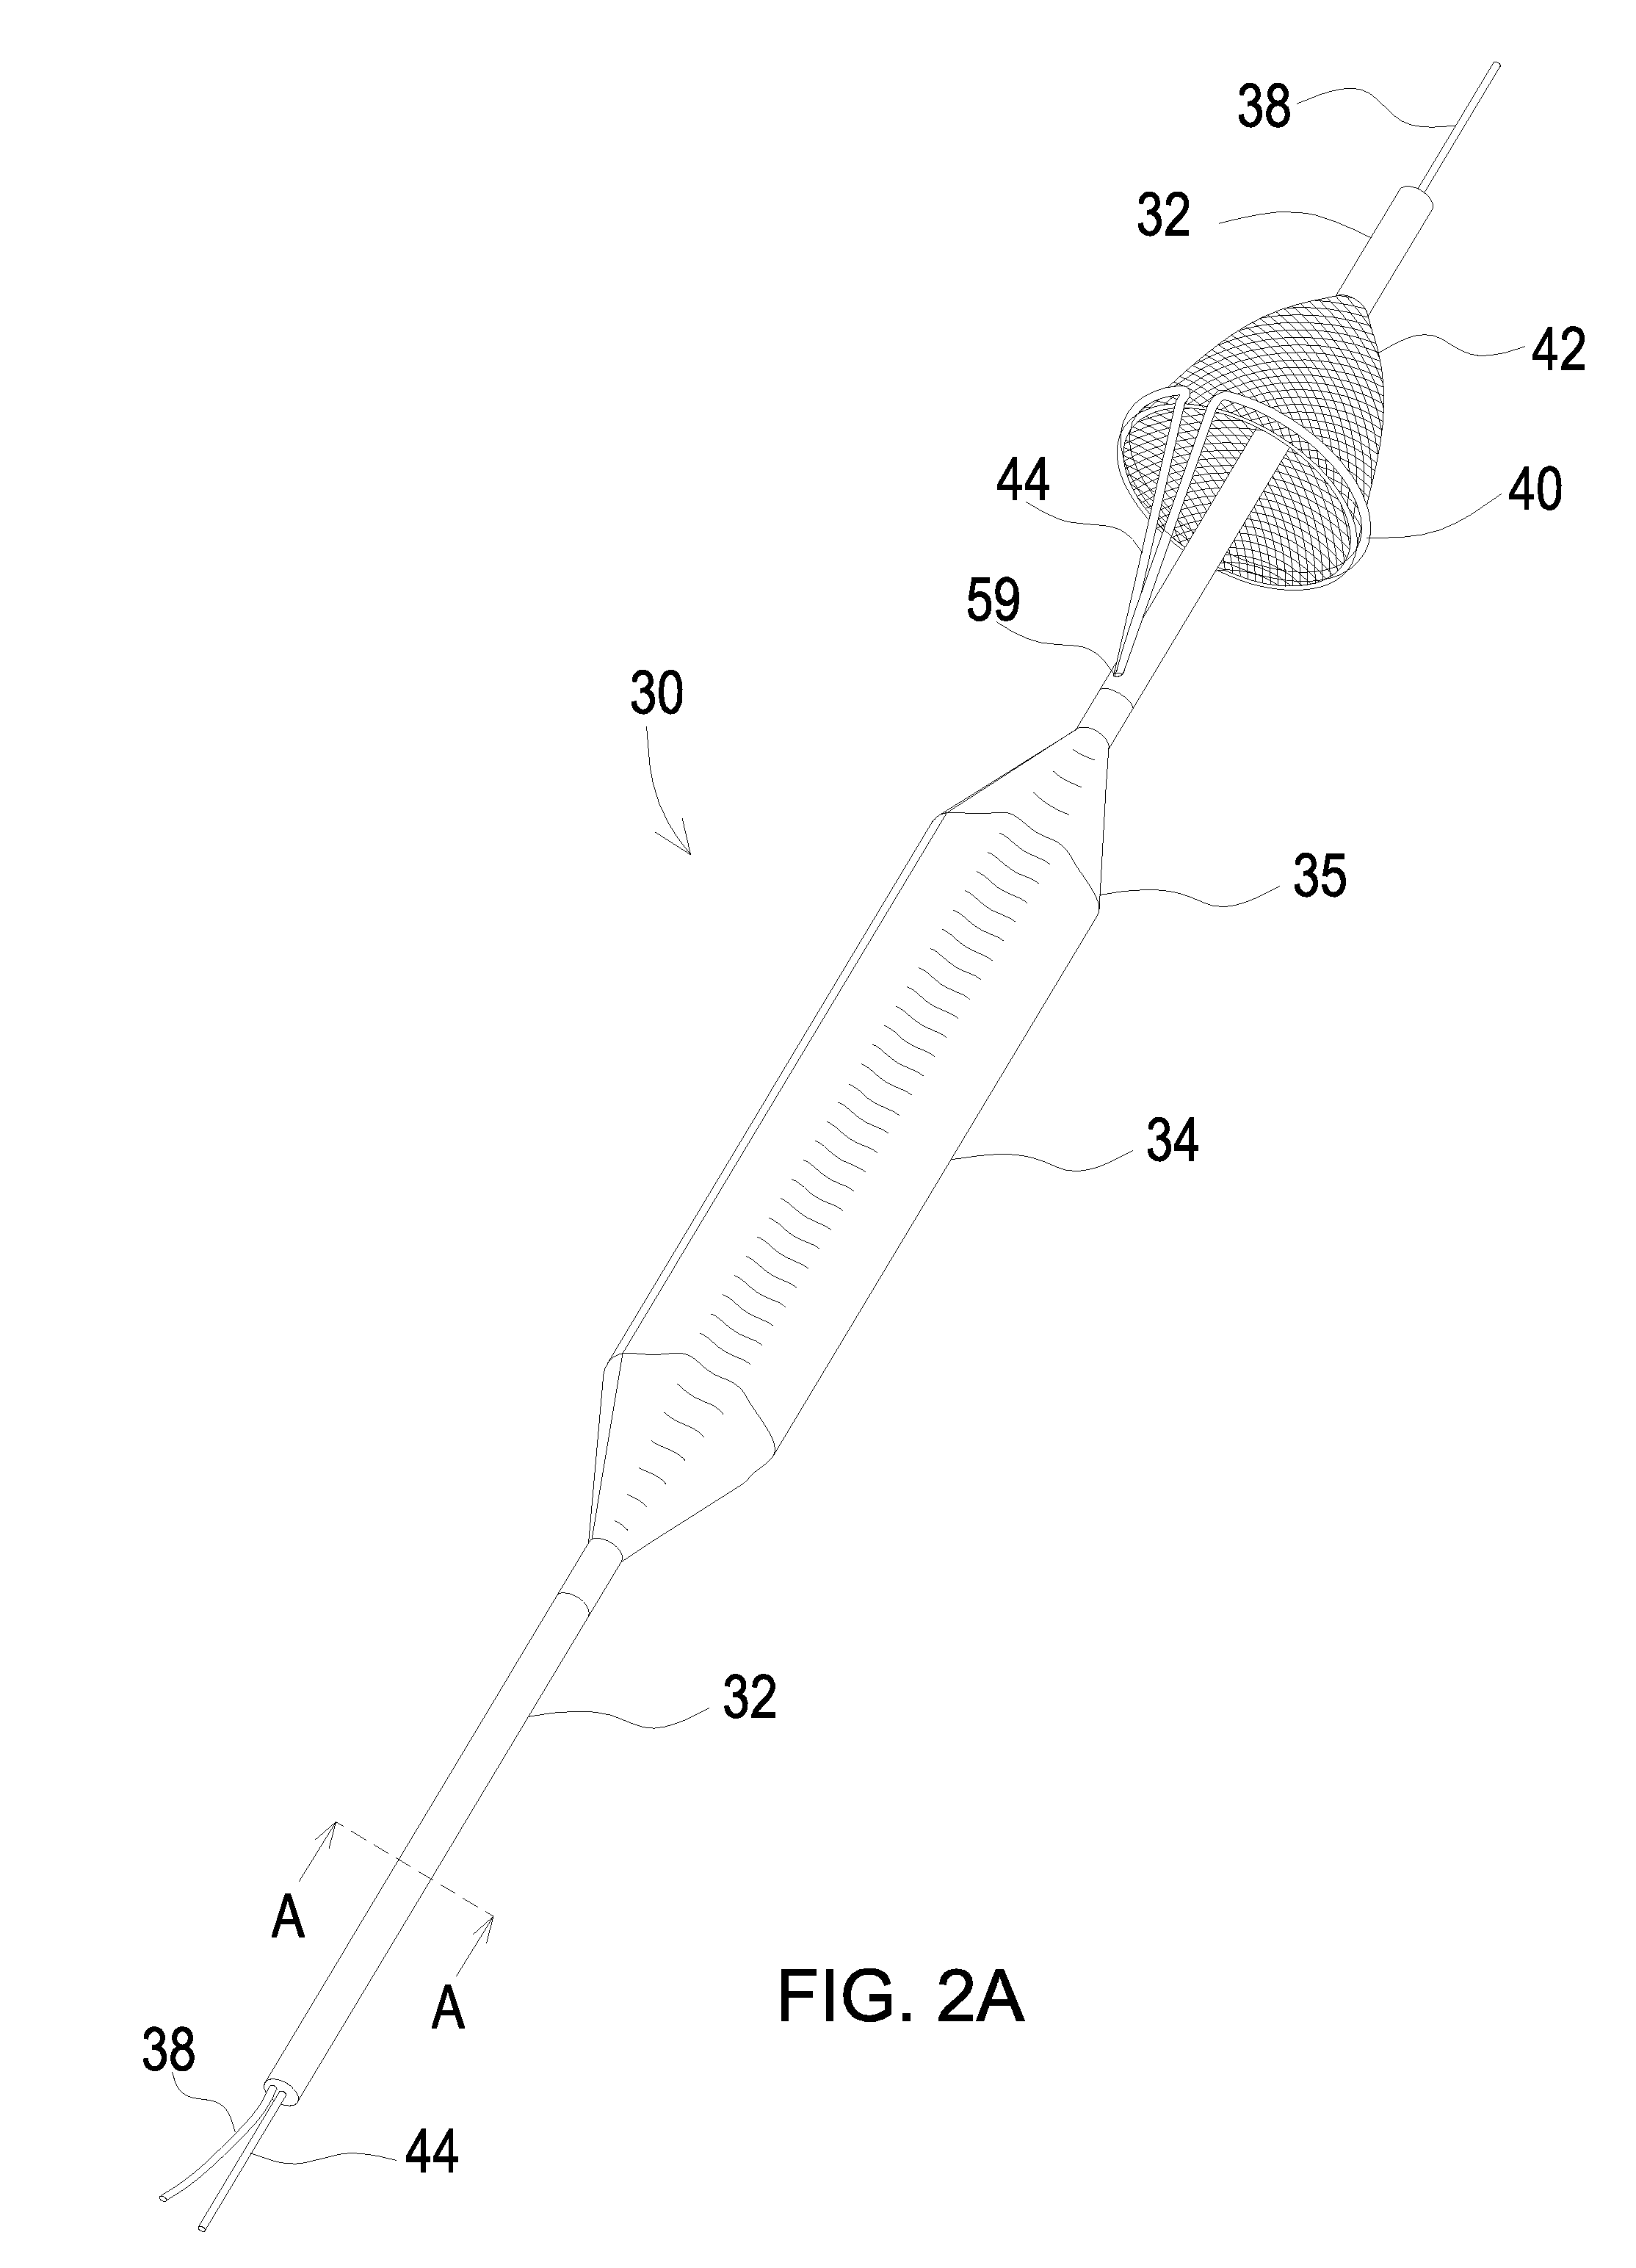 Integrated distal embolization protection apparatus for endo-luminal devices such as balloon, stent or tavi apparatus